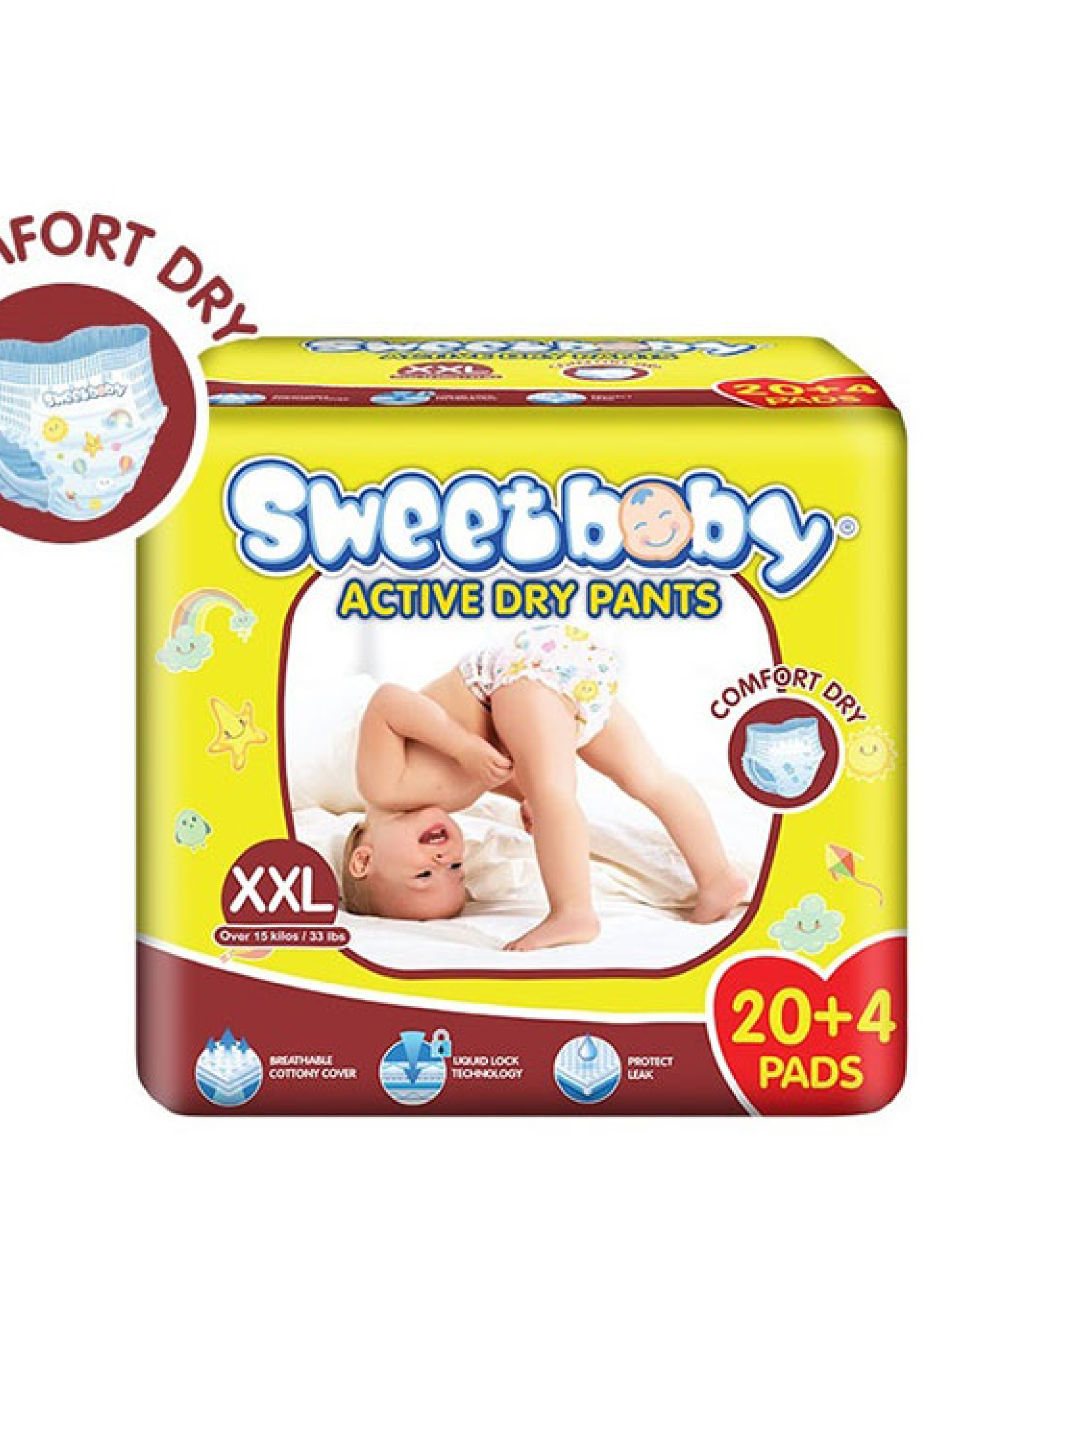 Sweetbaby Active Dry Pants XXL (20+4)